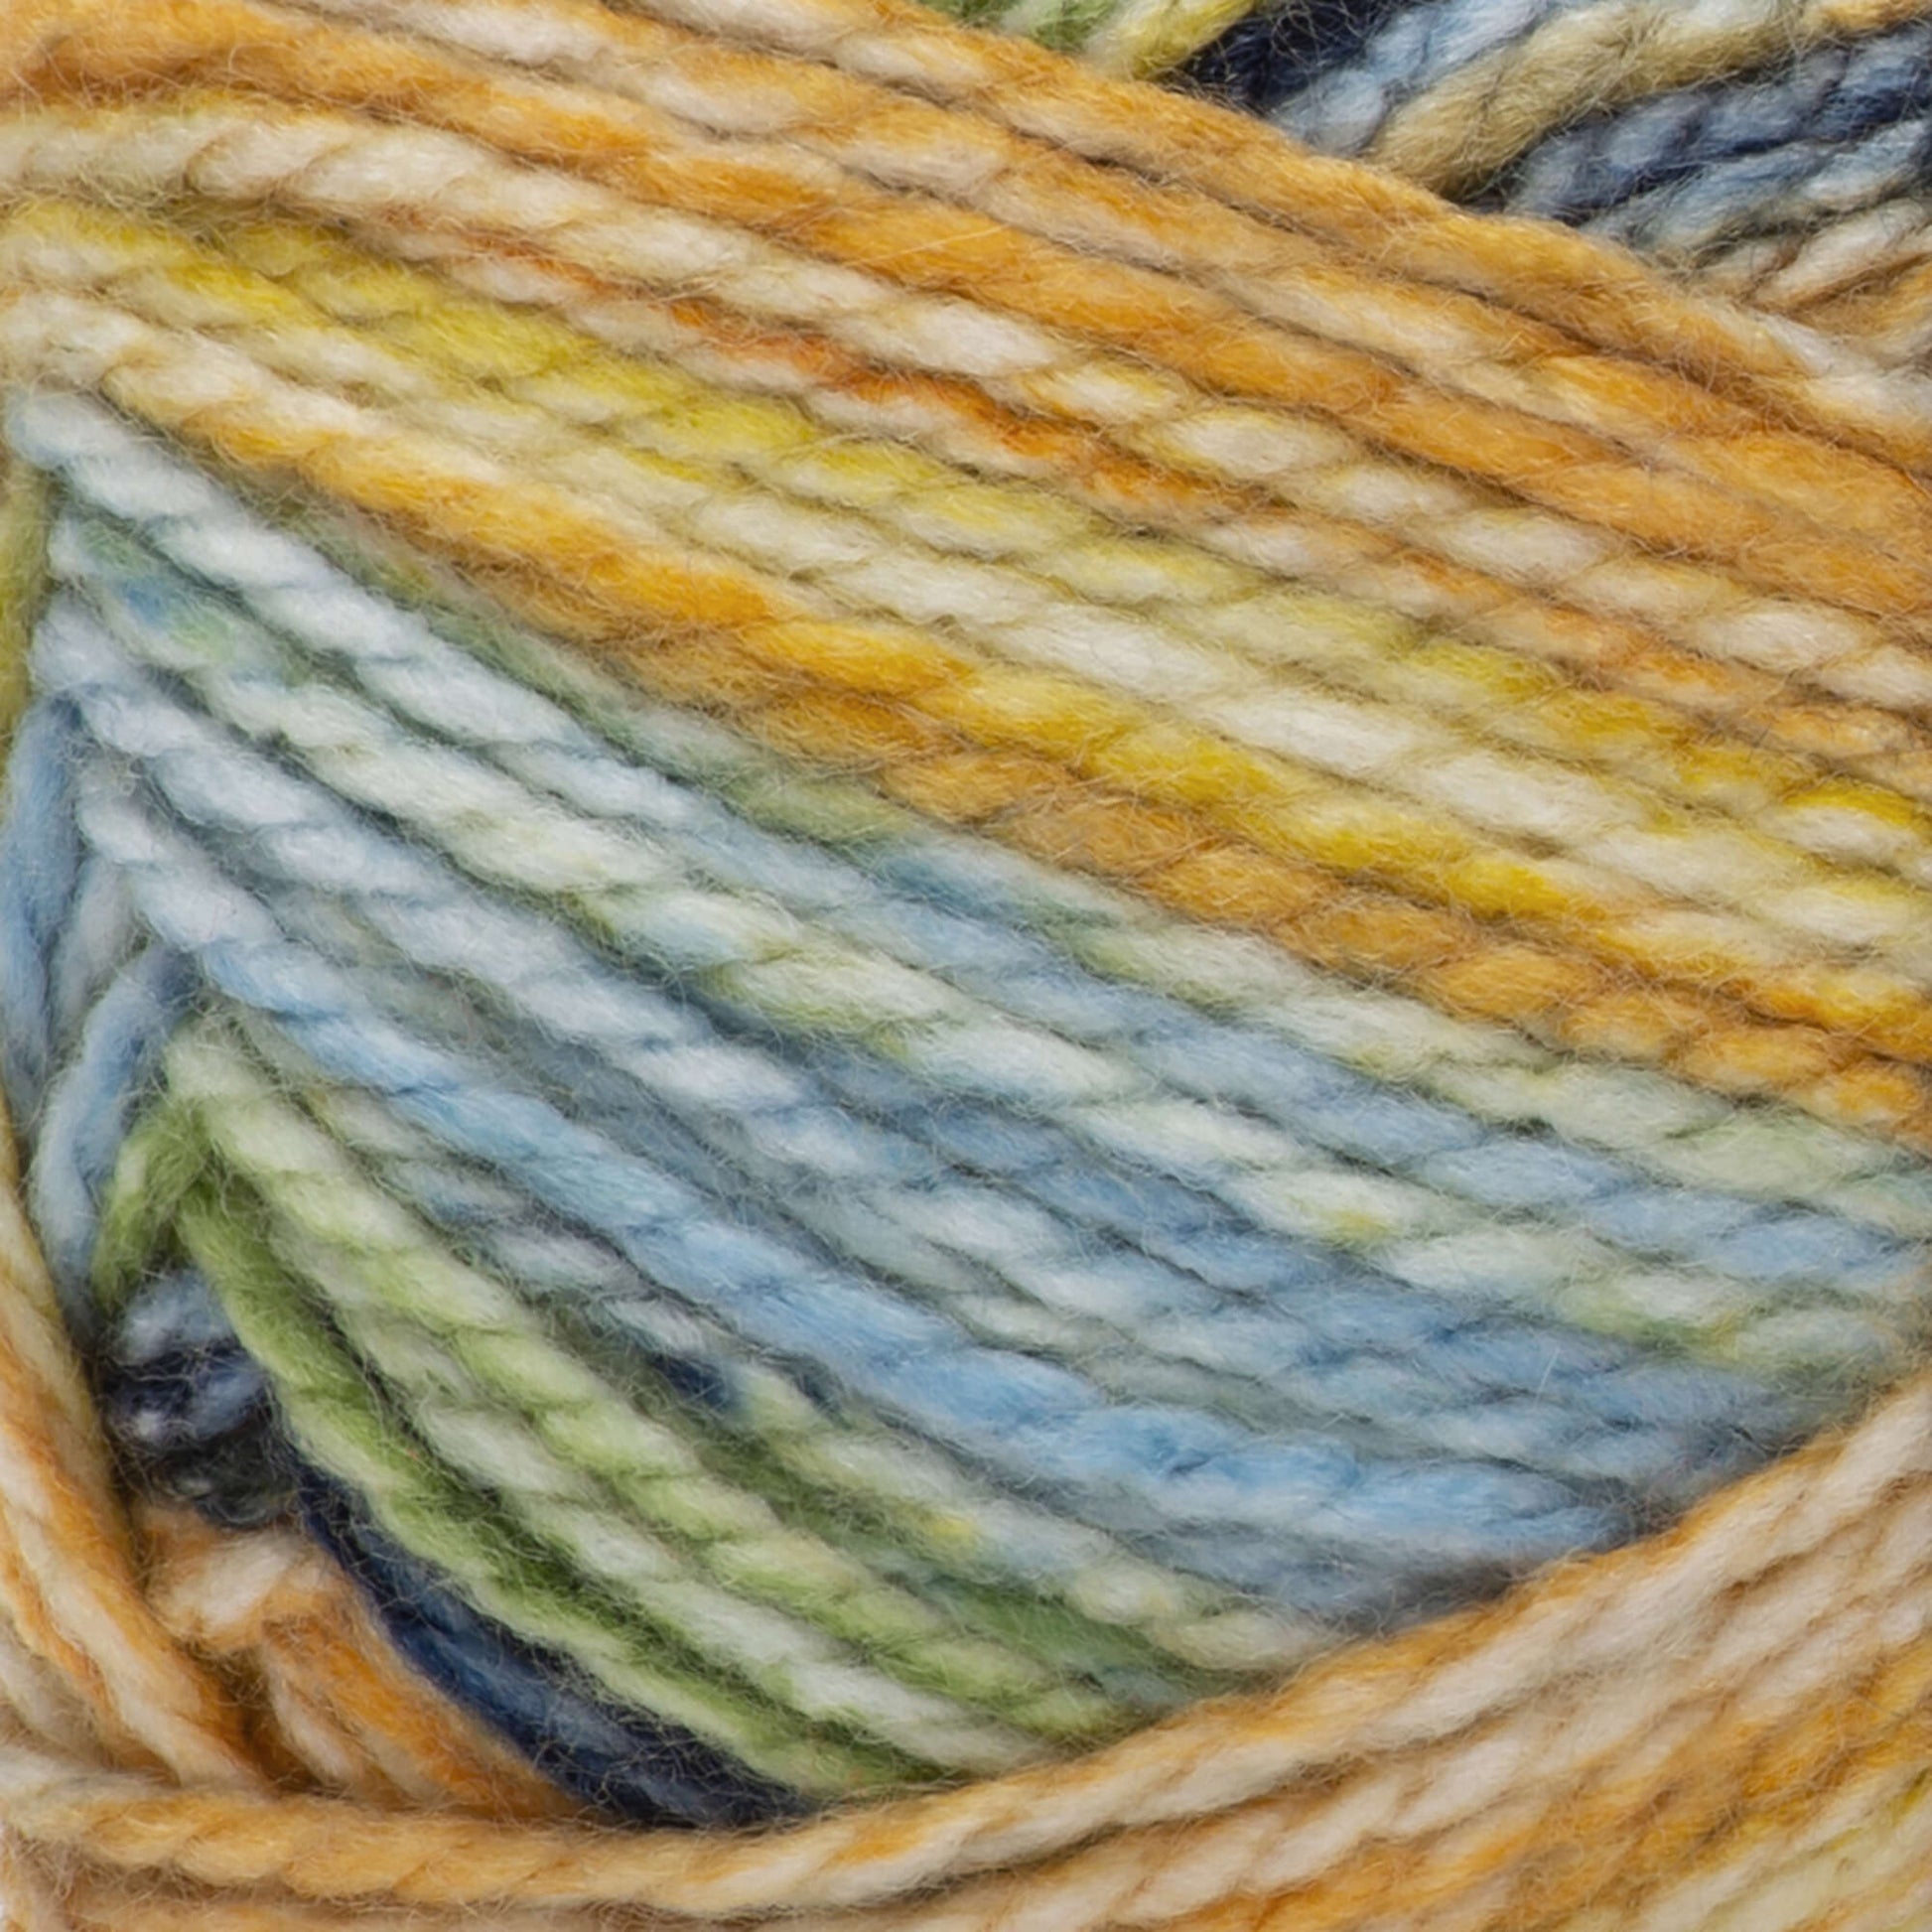 Red Heart Hopscotch Yarn - Discontinued shades